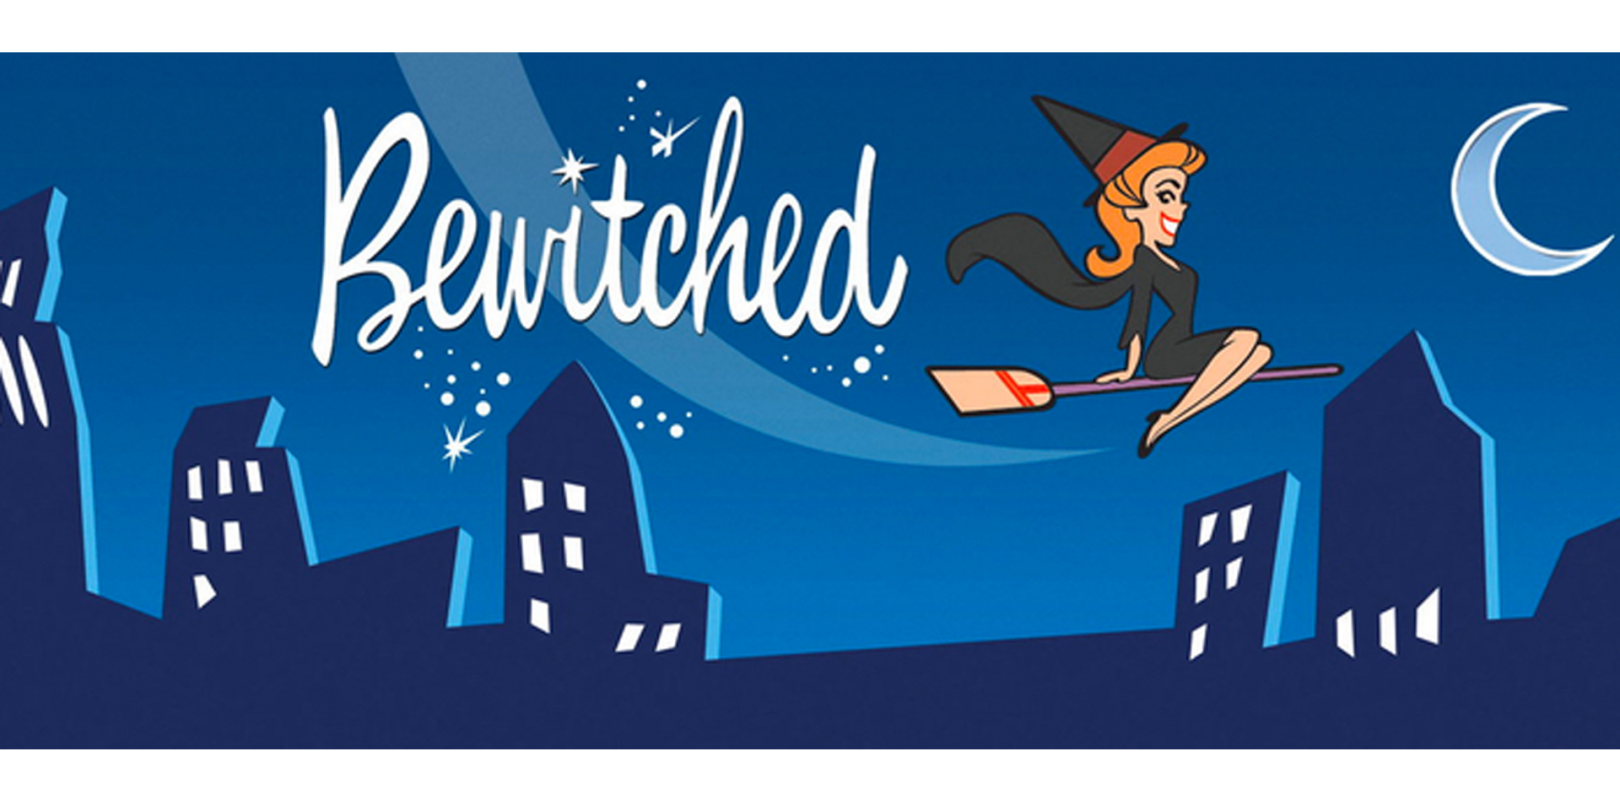 ABC to Reboot Bewitched